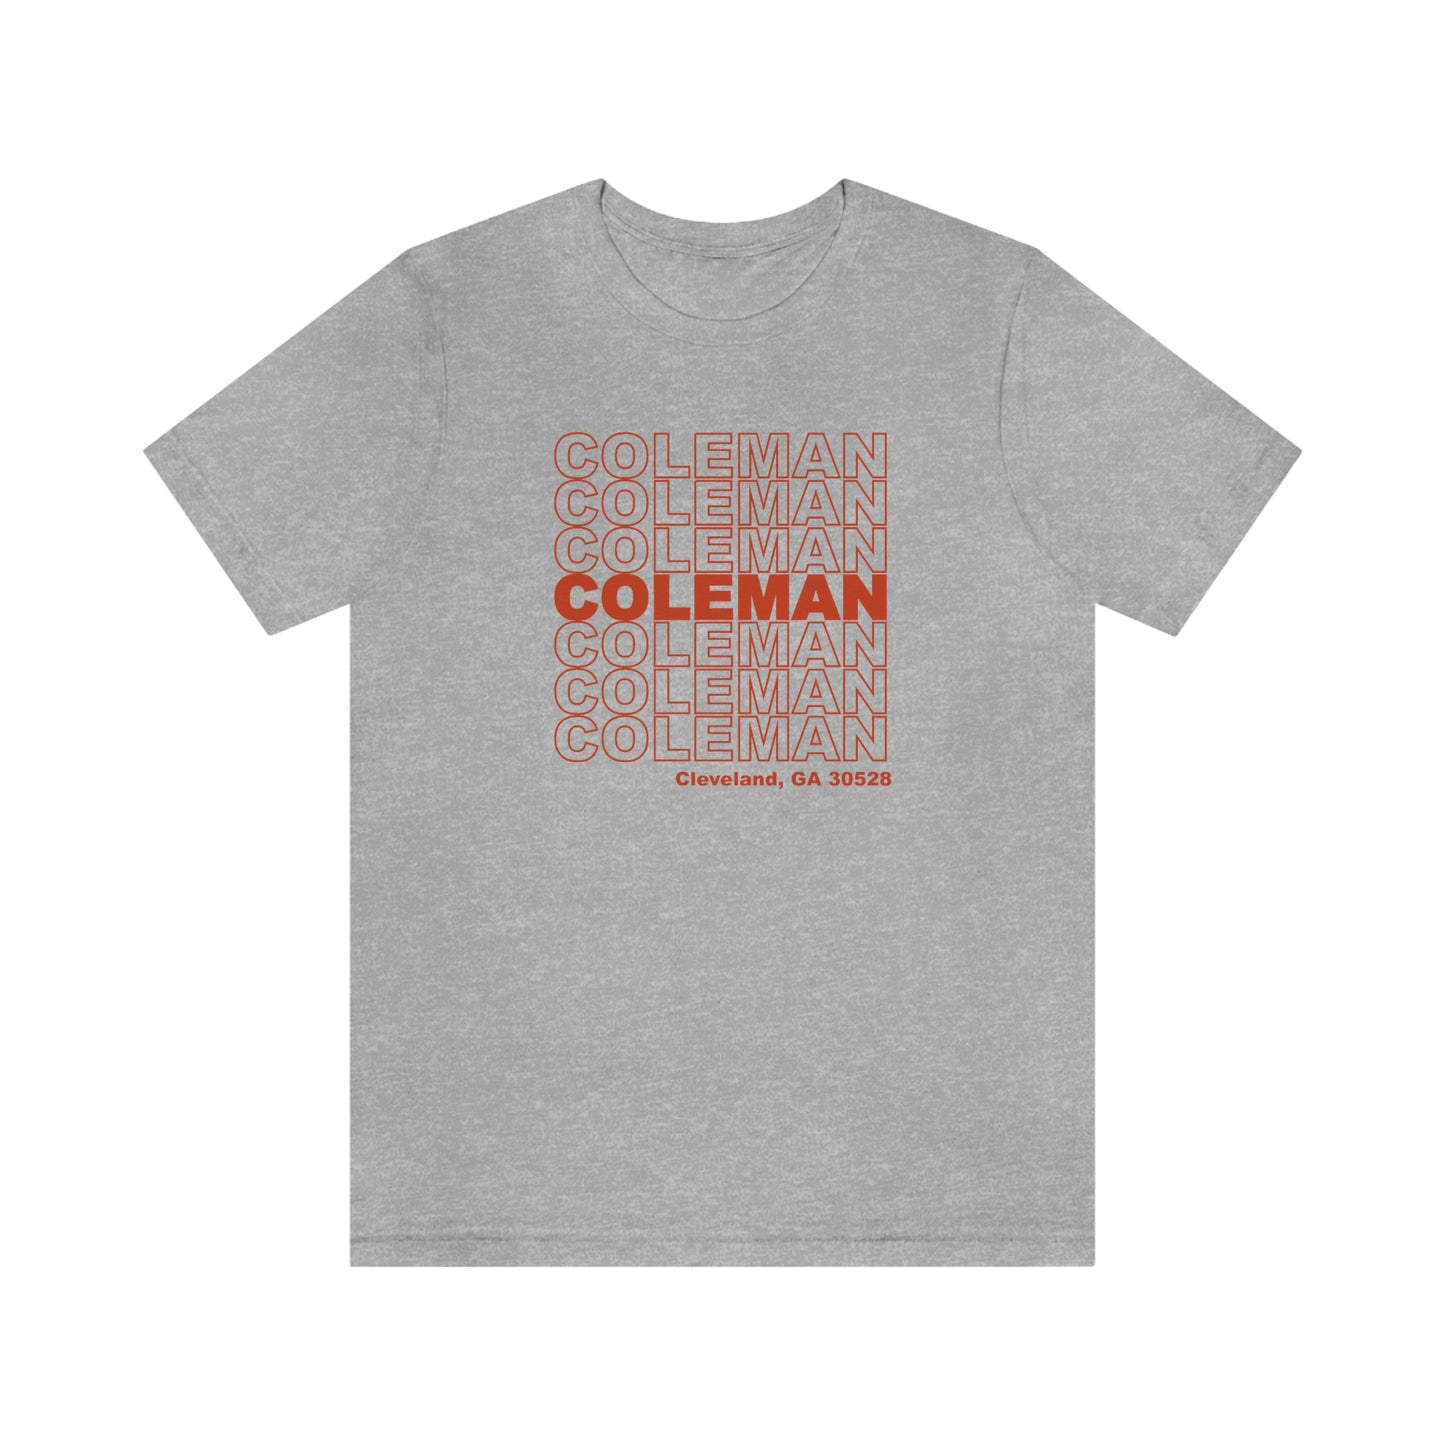 Coleman Coleman Coleman Adult SS Tee (multiple colors)